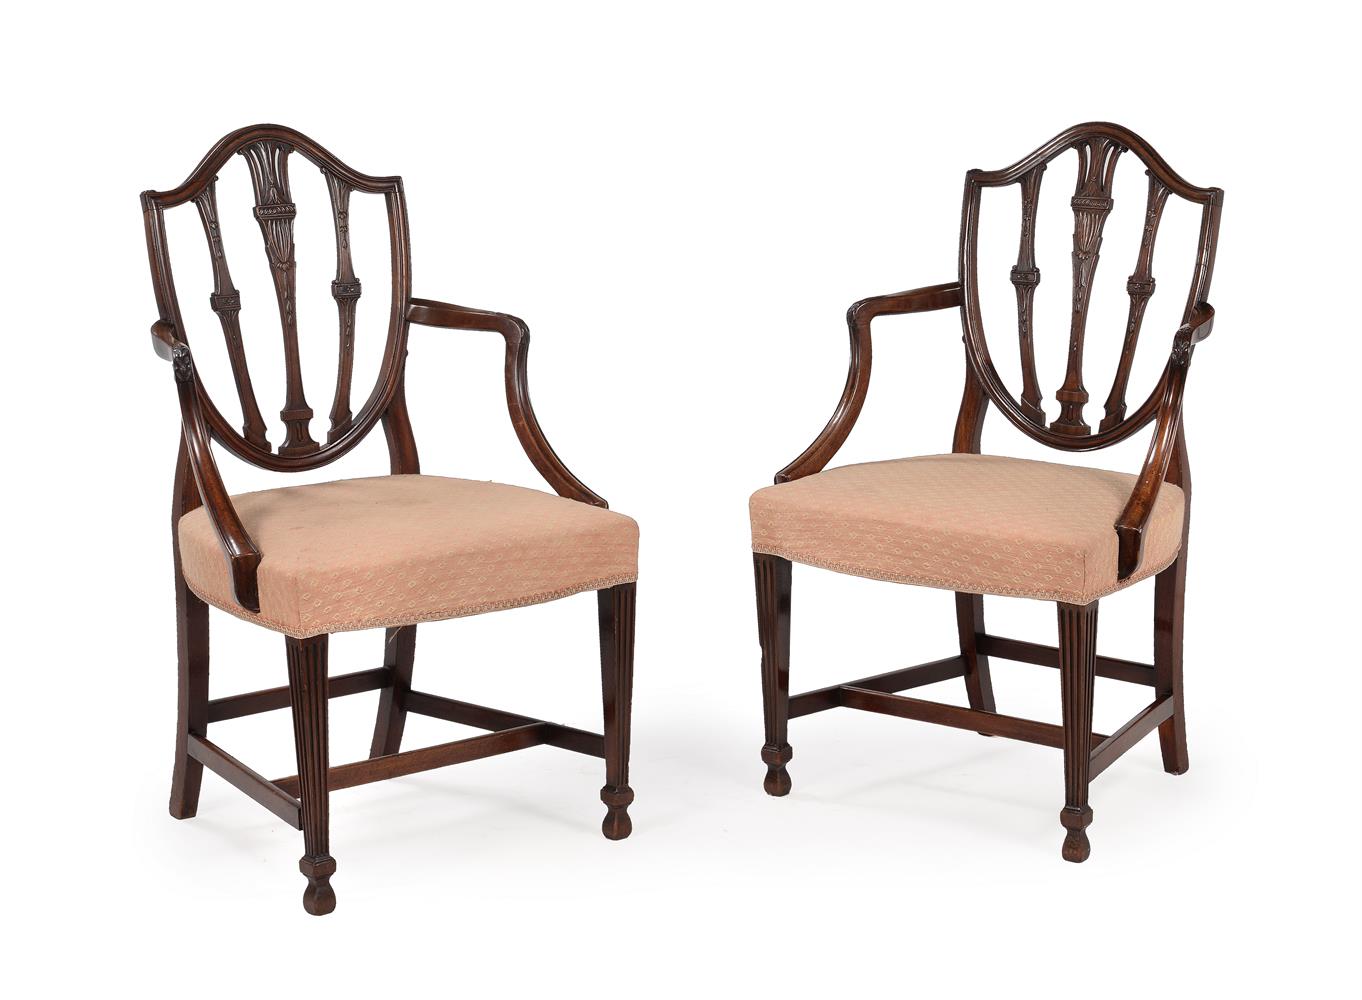 A PAIR OF GEORGE III MAHOGANY OPEN ARMCHAIRS, IN THE MANNER OF GEORGE HEPPLEWHITE - Image 2 of 3